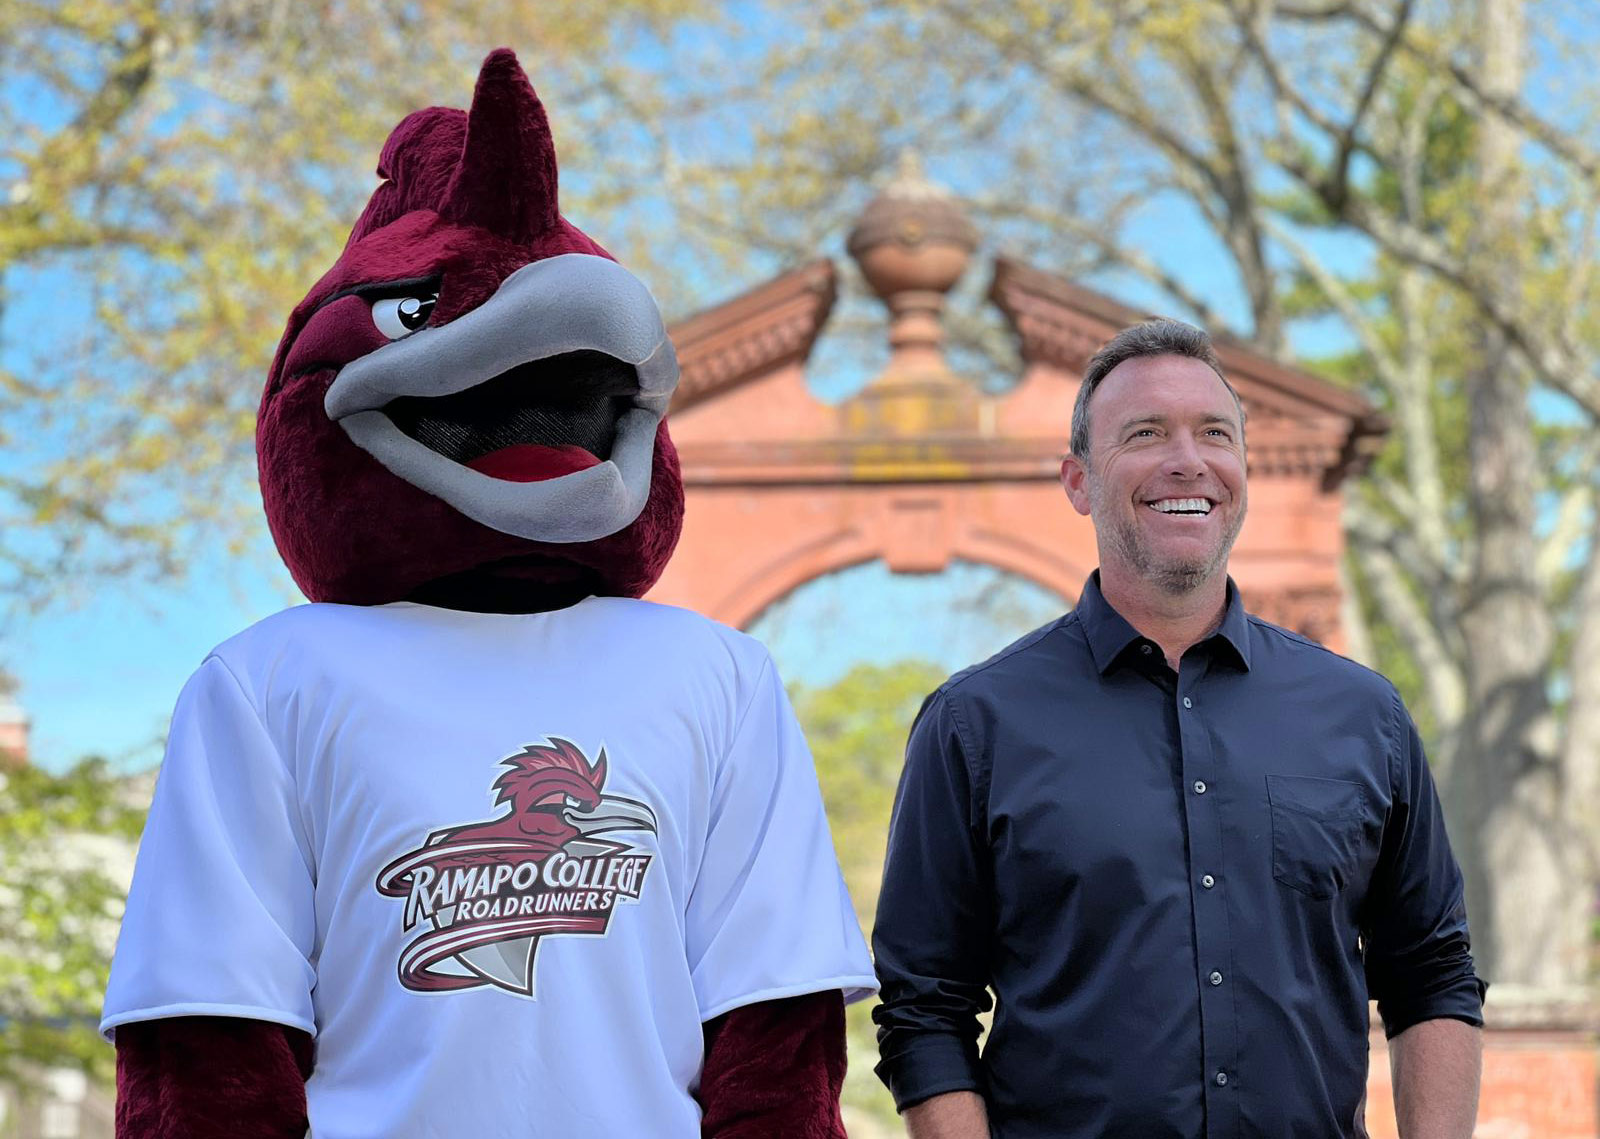 Alex Boylan and СƵ's Roadrunner mascot standing together outside of the Havemeyer Arch 